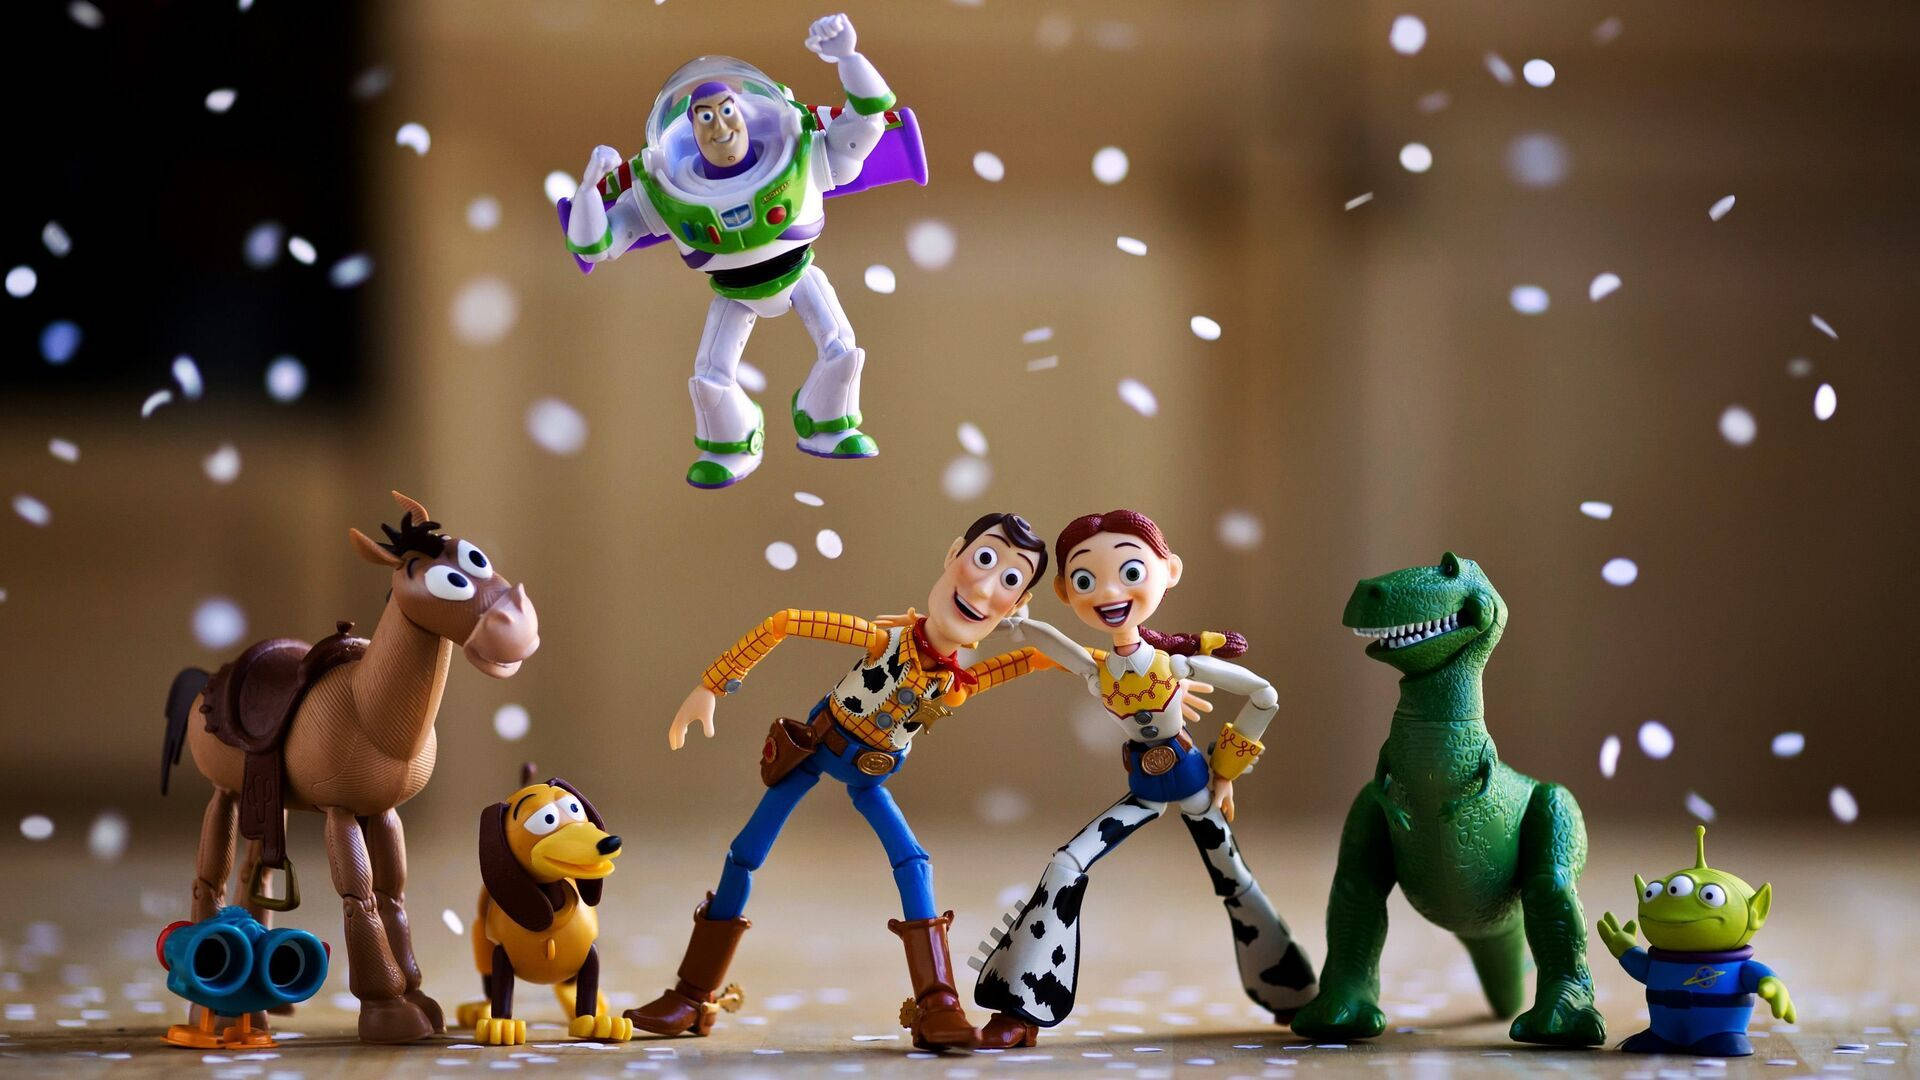 Celebratory Moment with Buzz Lightyear and Friends Wallpaper